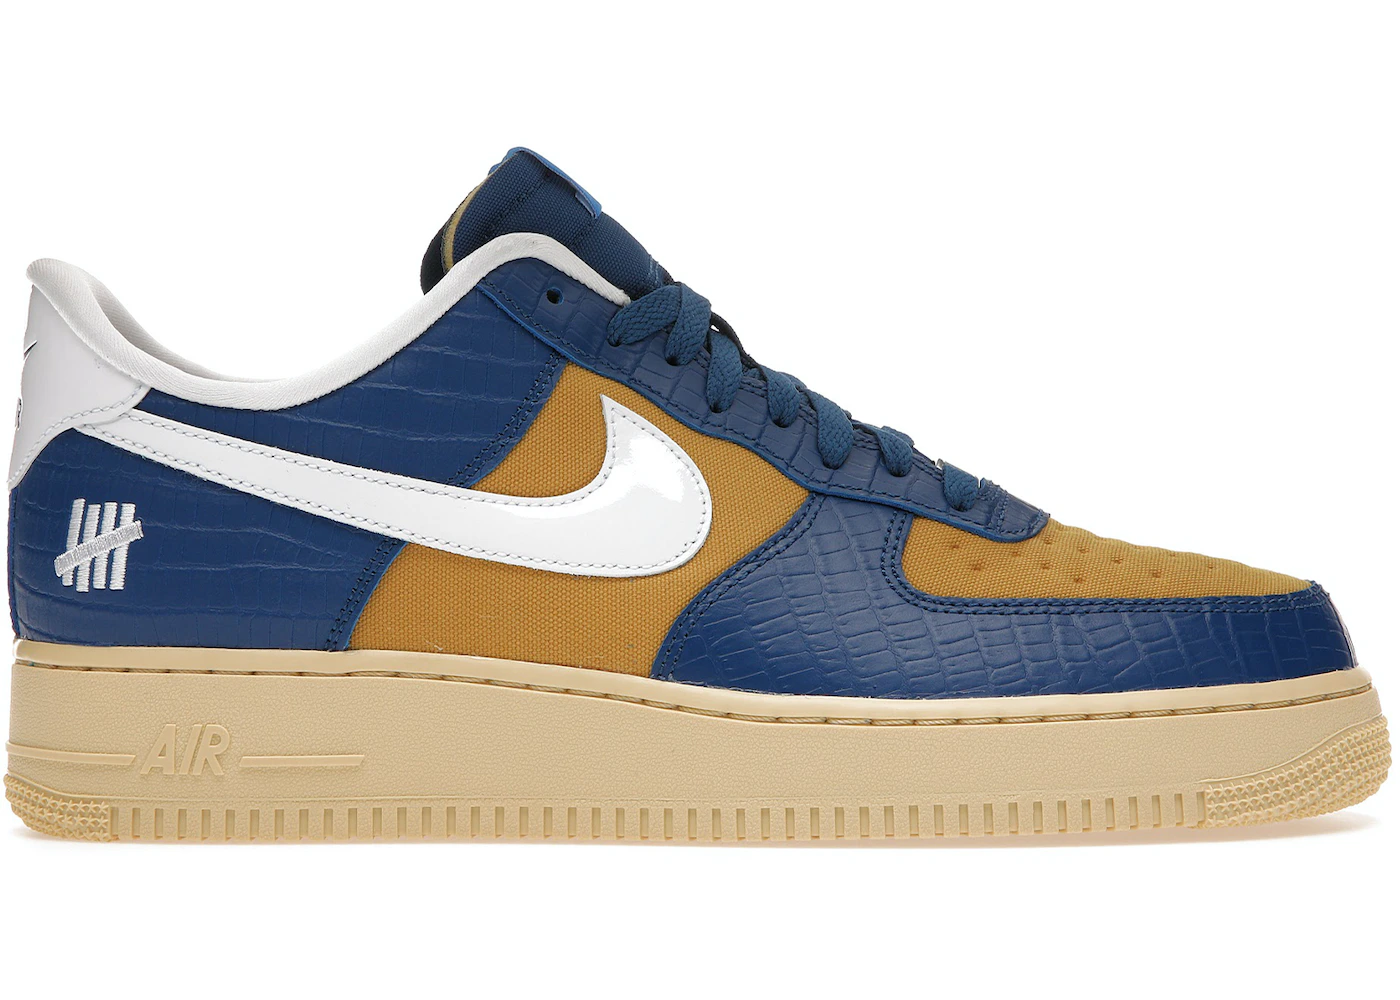 Anuncio Abrumador dueña Nike Air Force 1 Low SP Undefeated 5 On It Blue Yellow Croc - DM8462-400 -  ES